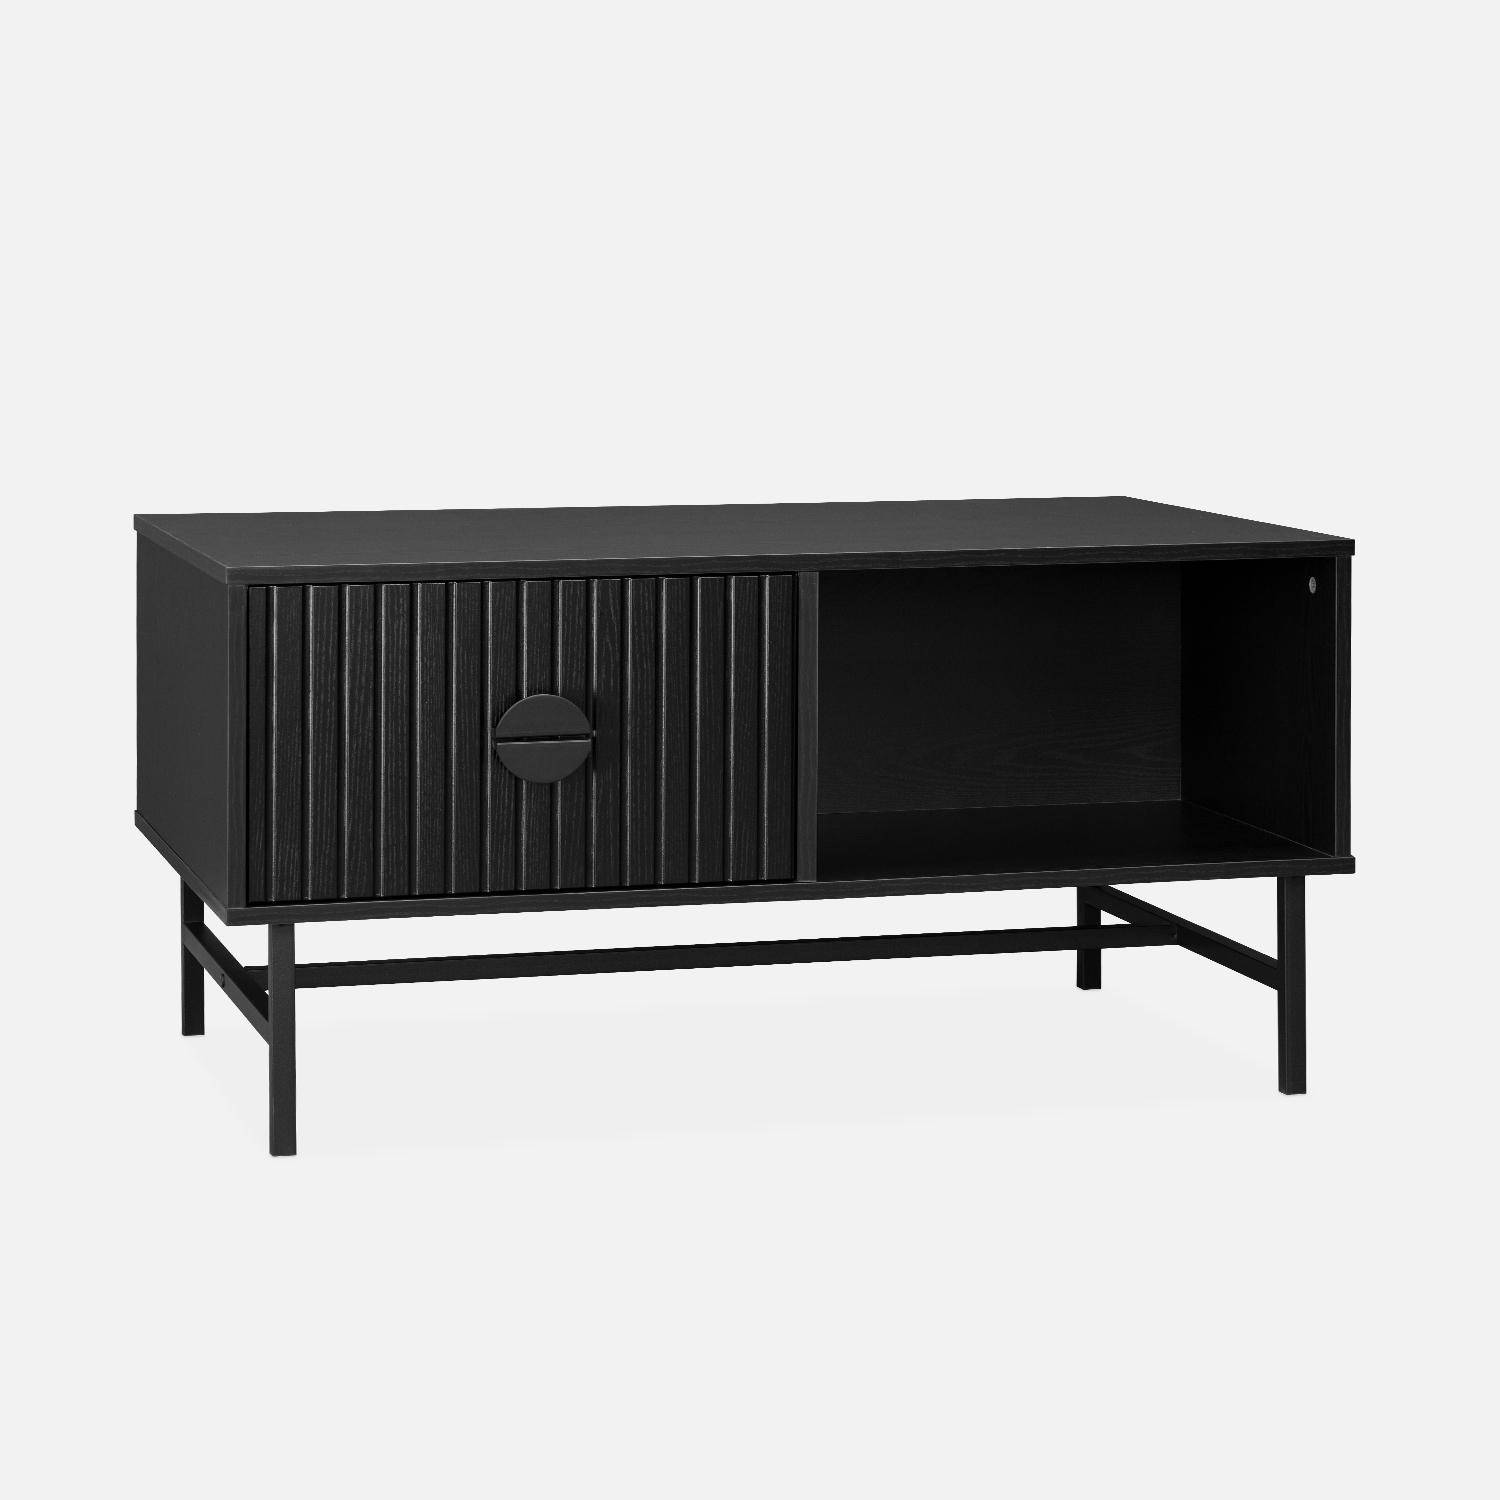 Coffee table with one drawer and one storage nook, ridged effect, industrial style, 100x59x50.2cm - Bazalt - Black Photo4